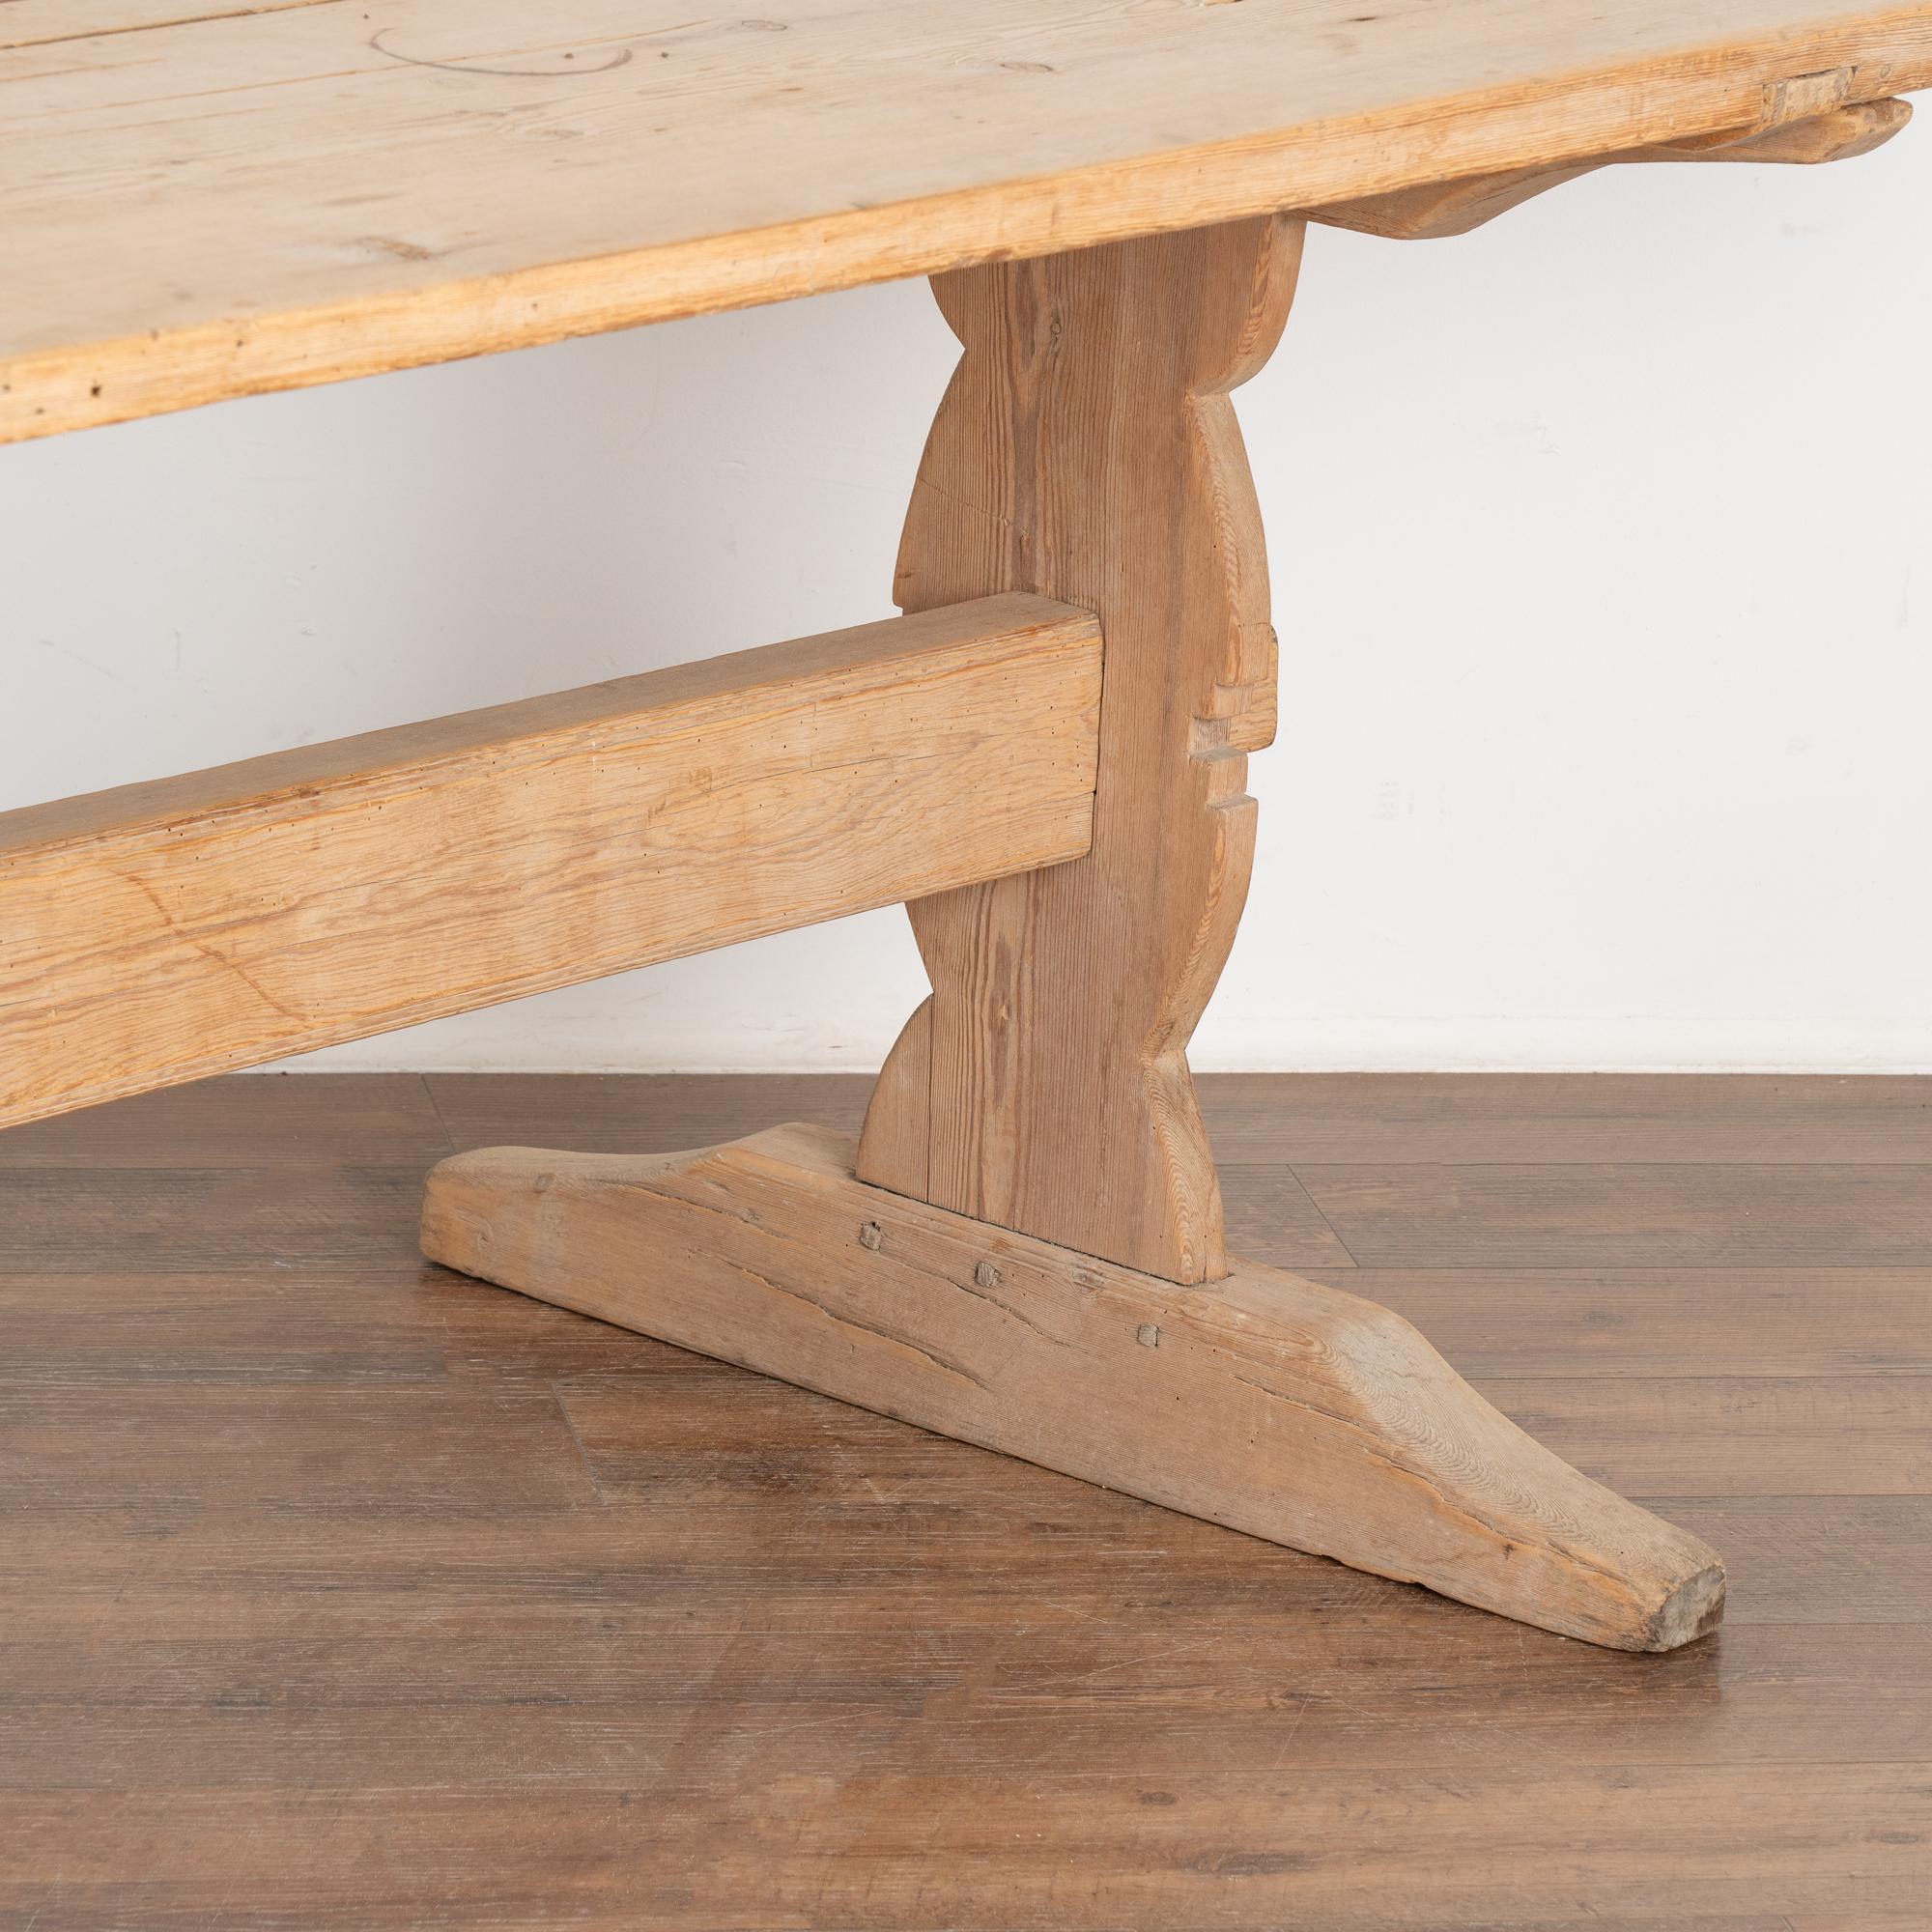 19th Century Pine Farm Trestle Table Dining Table from Sweden, circa 1820